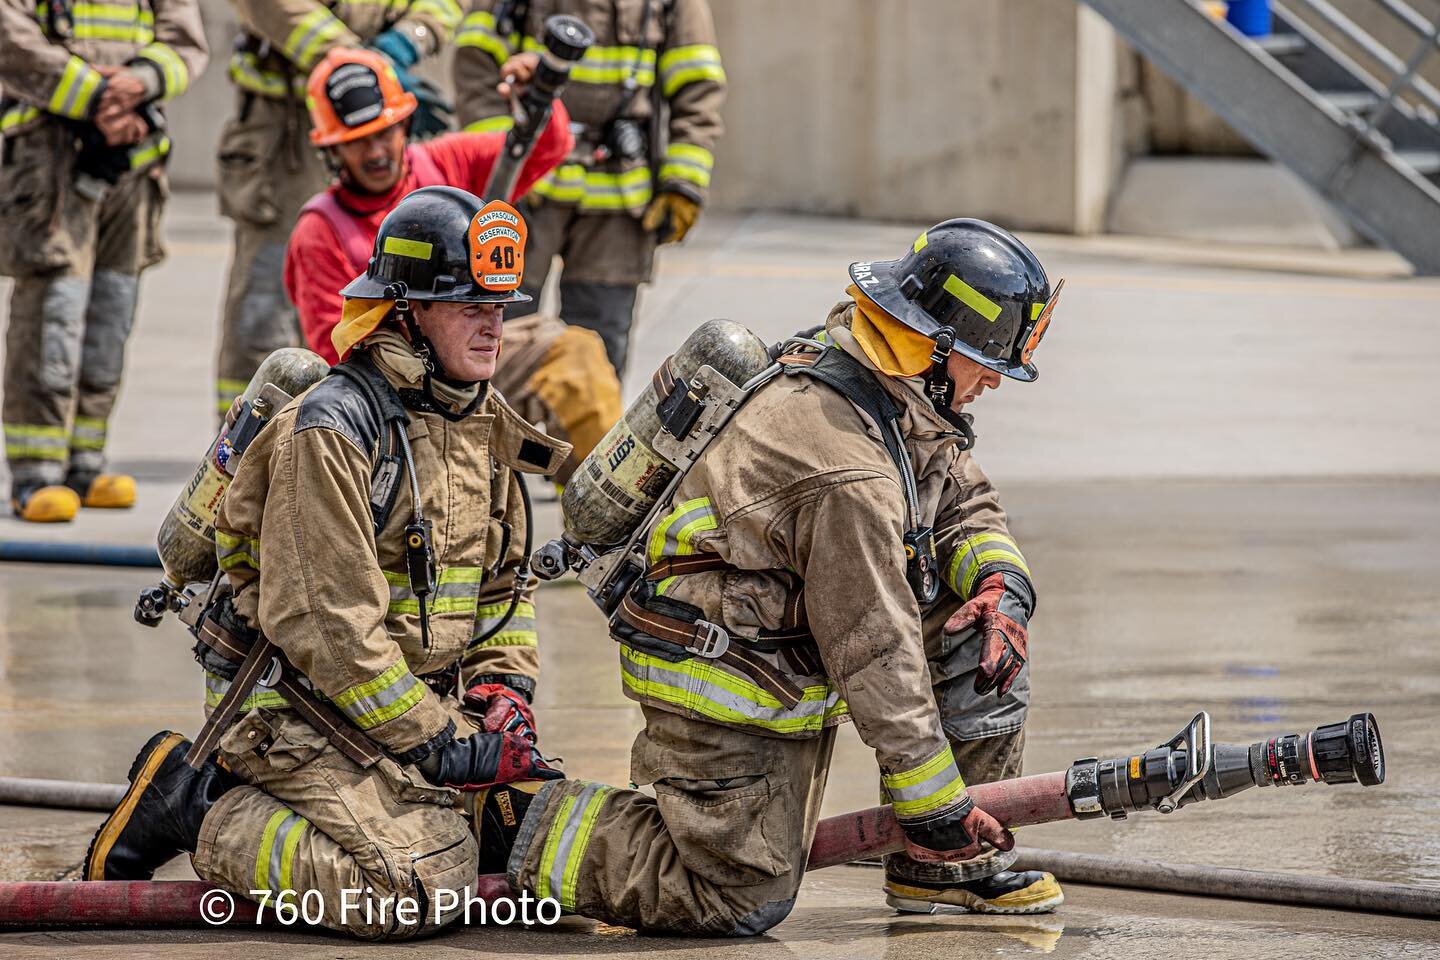 @sprfa #academy40 really did make for some amazing photo subjects! I was so honored to be able to be there to capture apart of these cadets journeys to becoming firefighters!
.
.
#760 #760firephoto #futurefirefighter #sprfa #academy40 #fire #firefigh